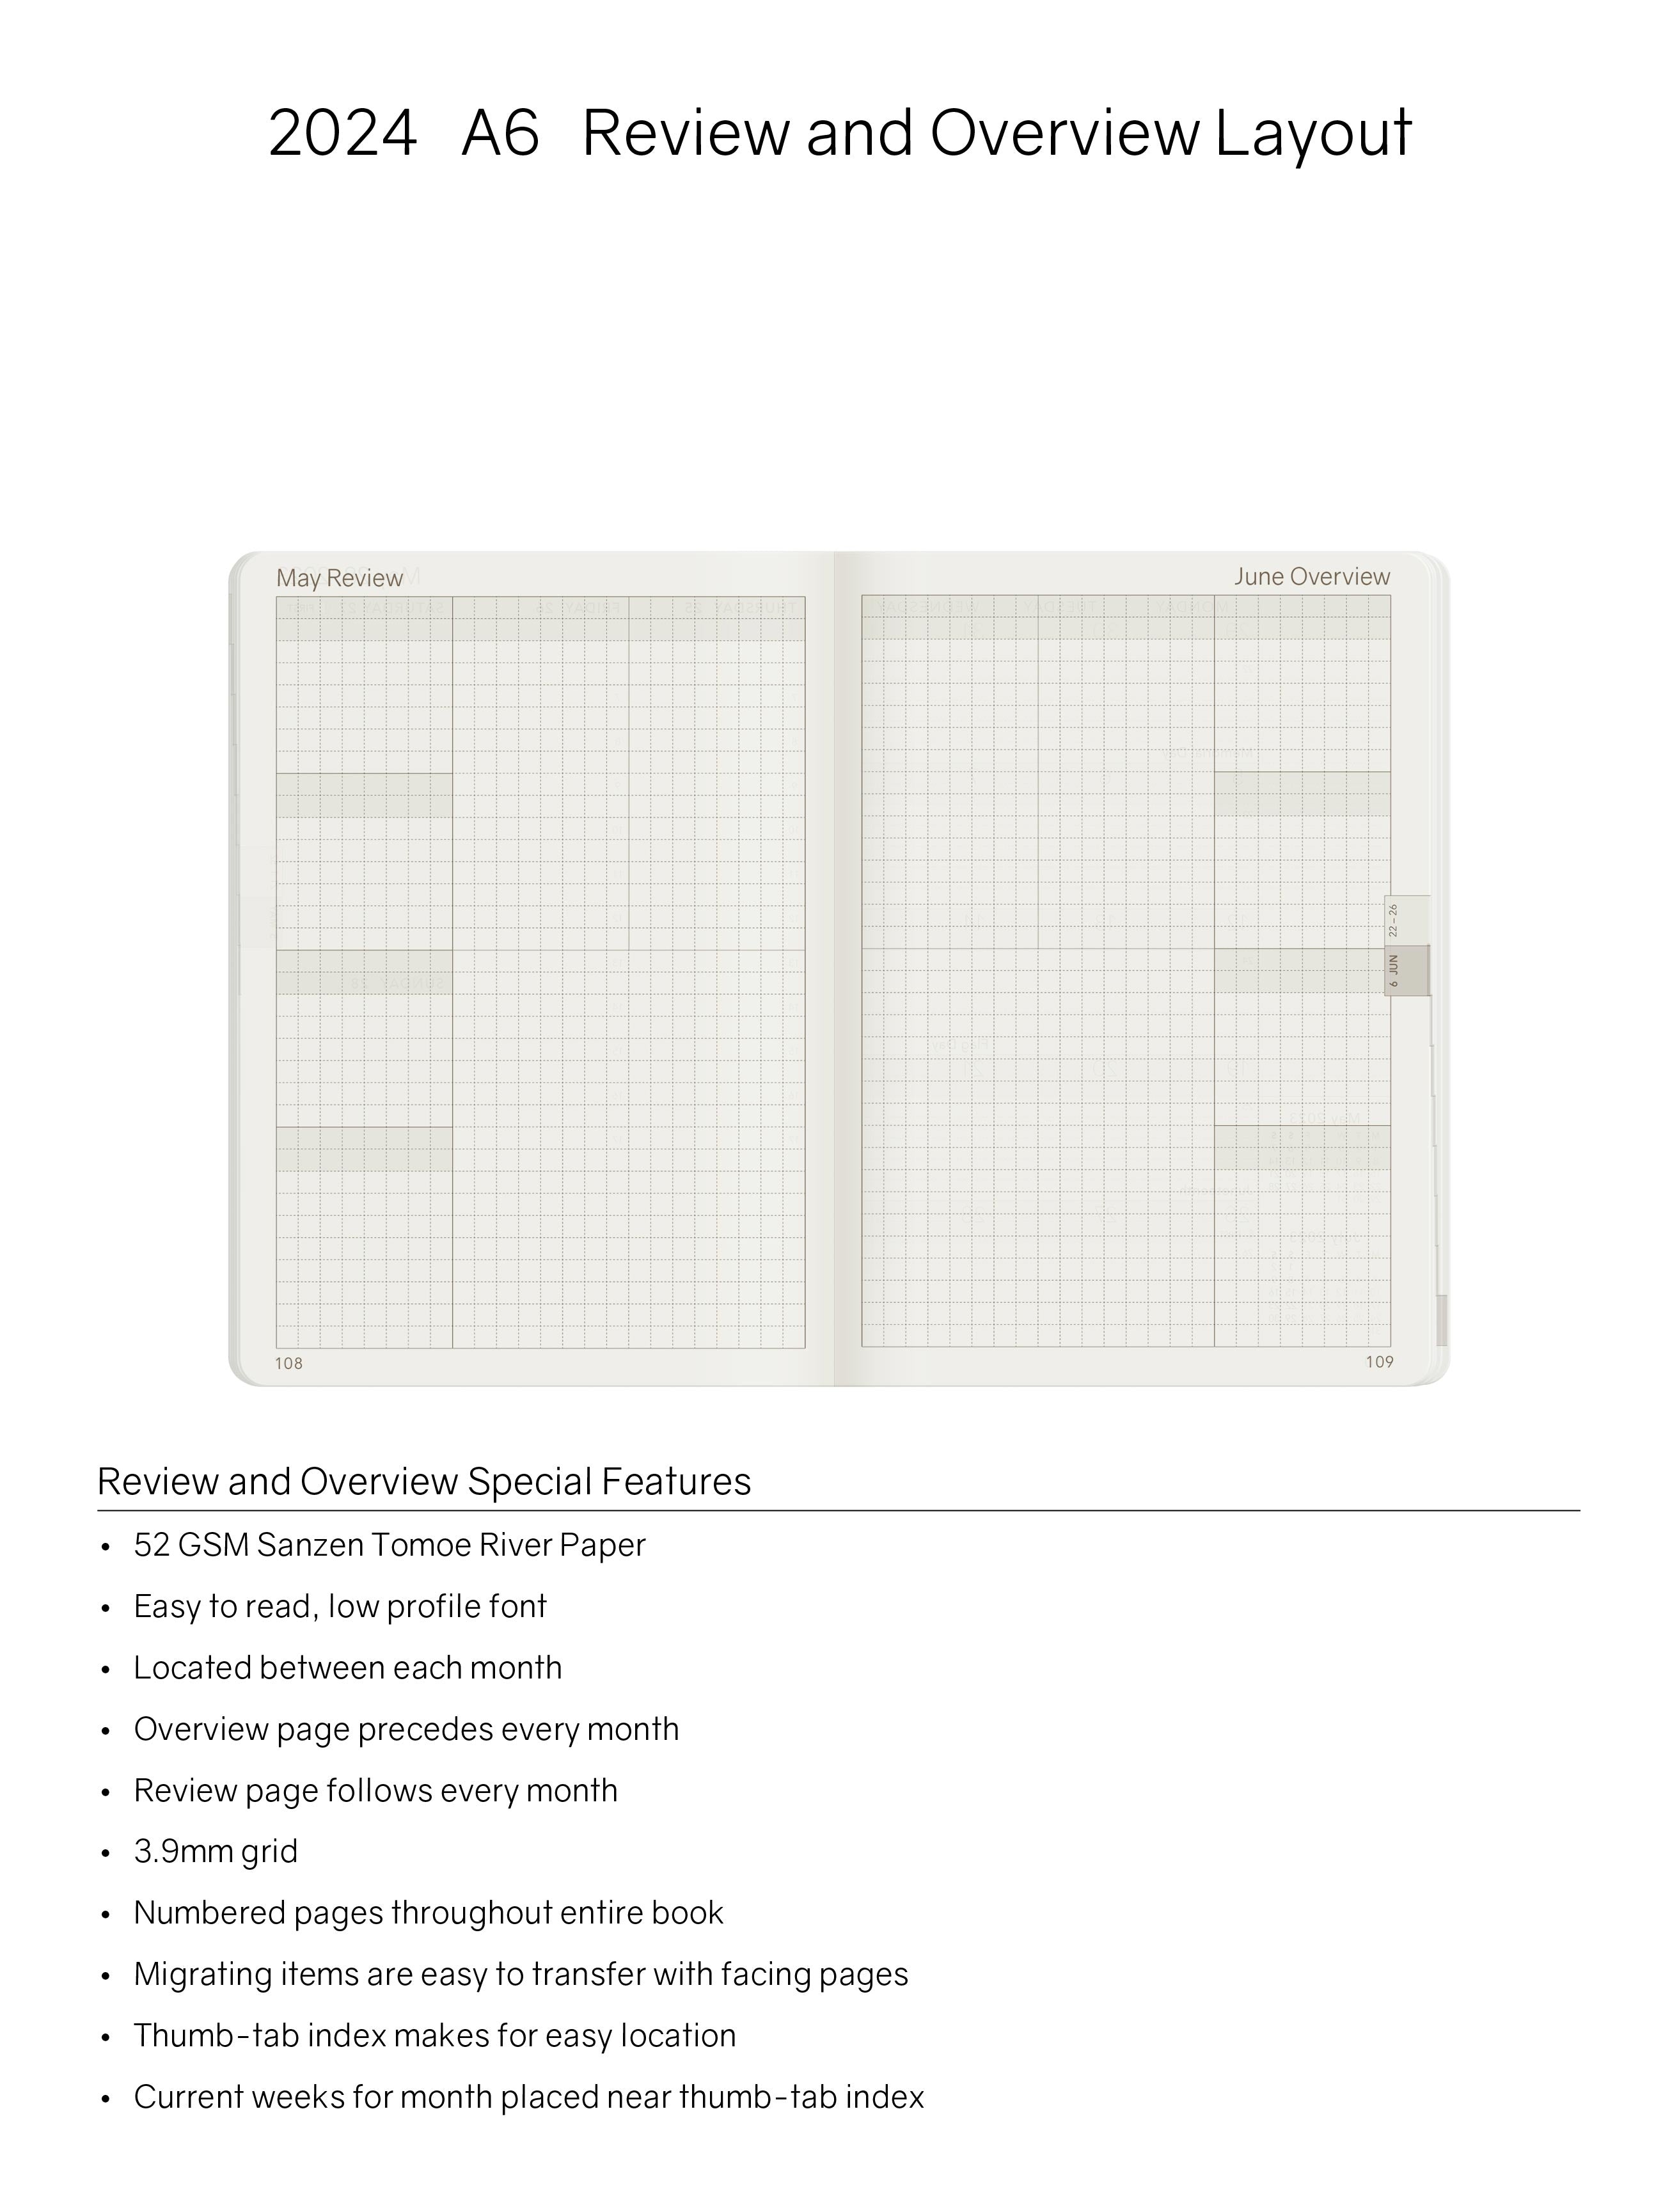 2024 A6 Weekly Planner - Alpine Lake (Blue) - 52gsm Tomoe River Paper (Stacked Weekends)